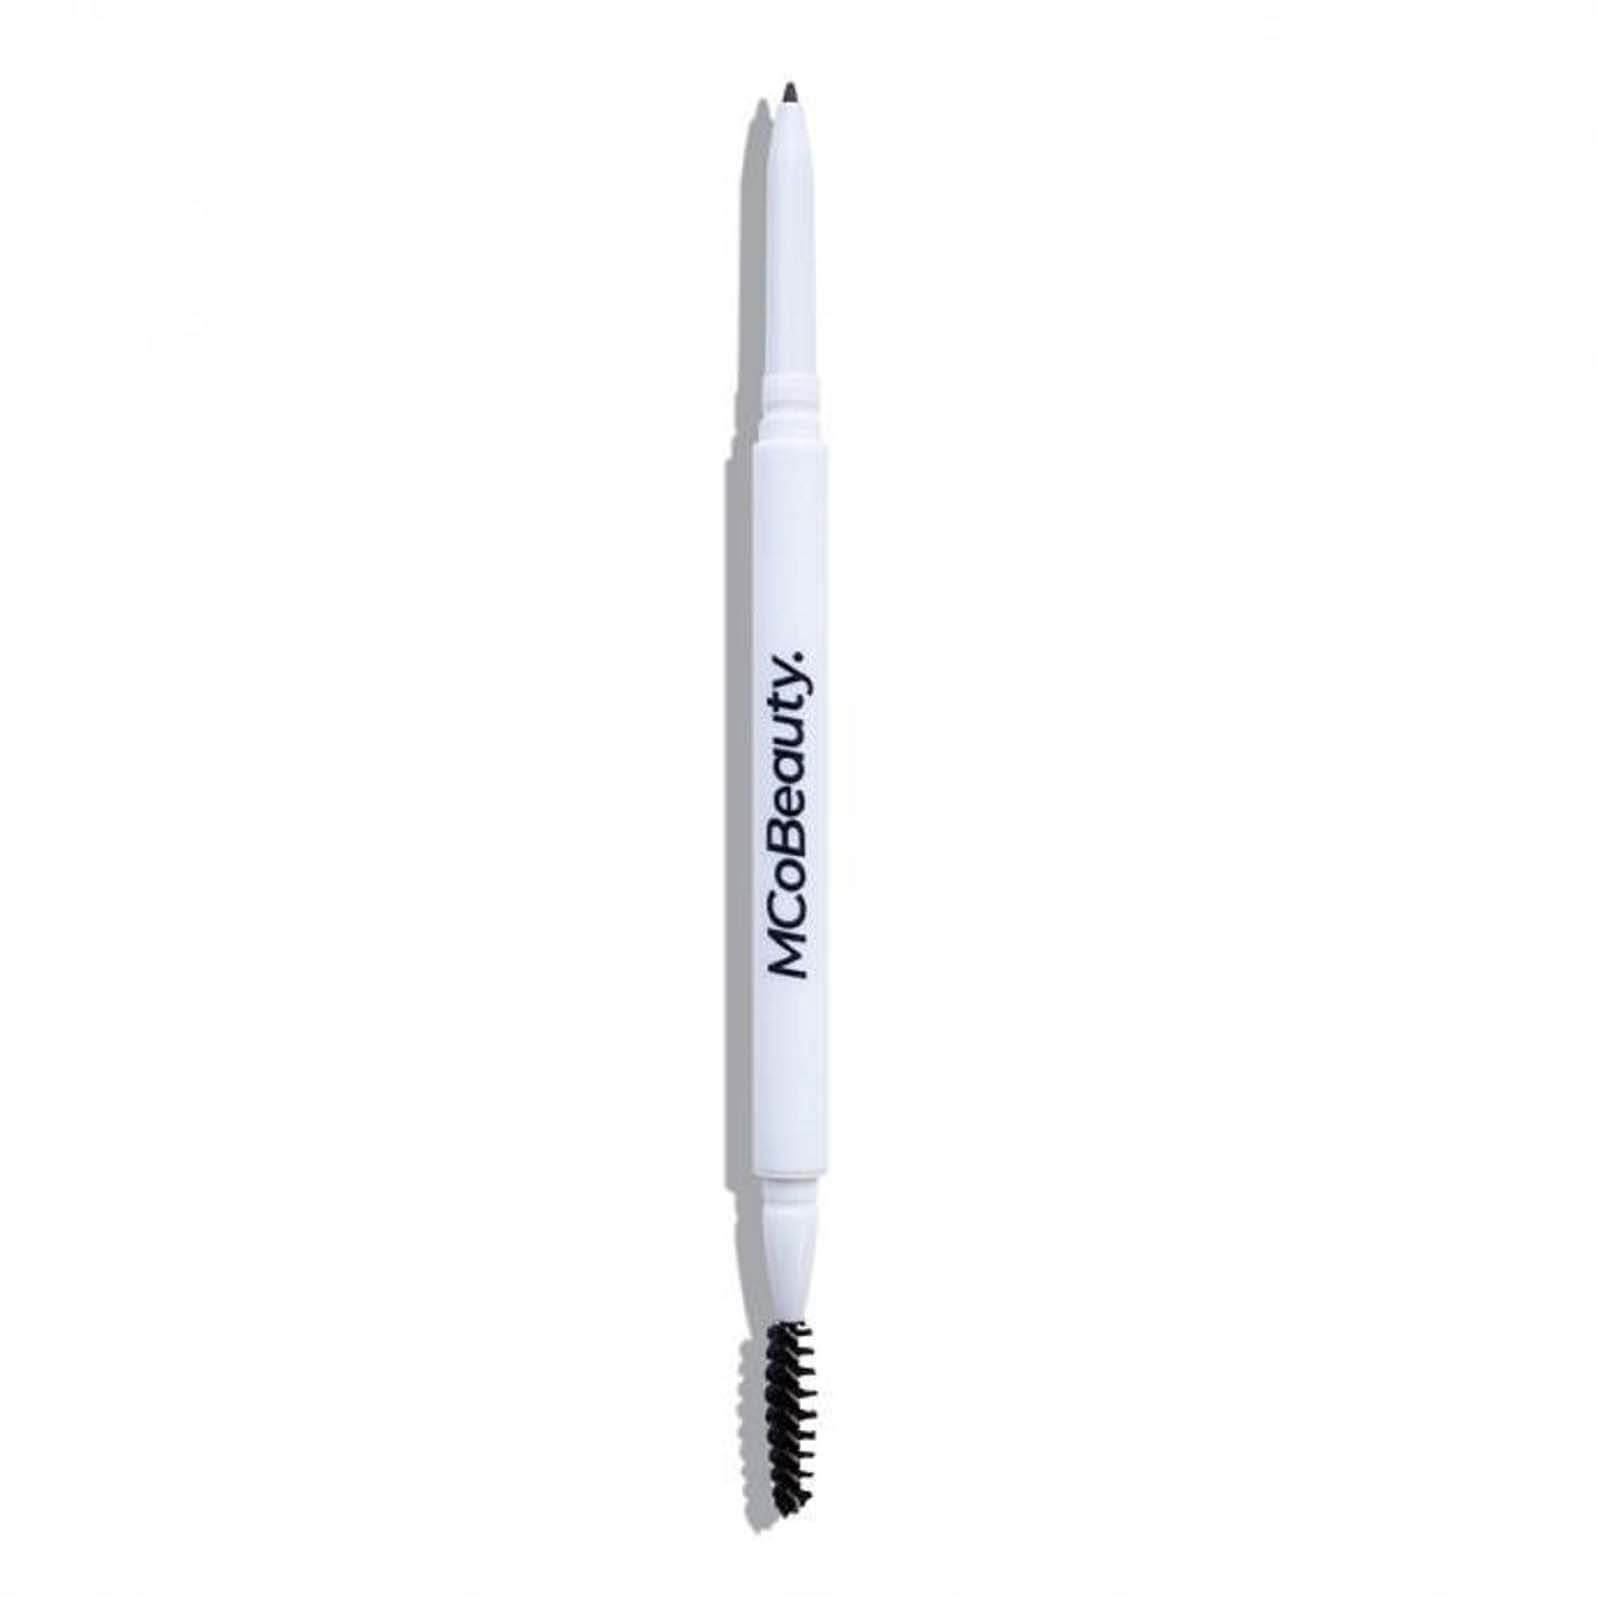 MCoBeauty Precision Brow Pencil 0.22g (Various Shades) - Universal